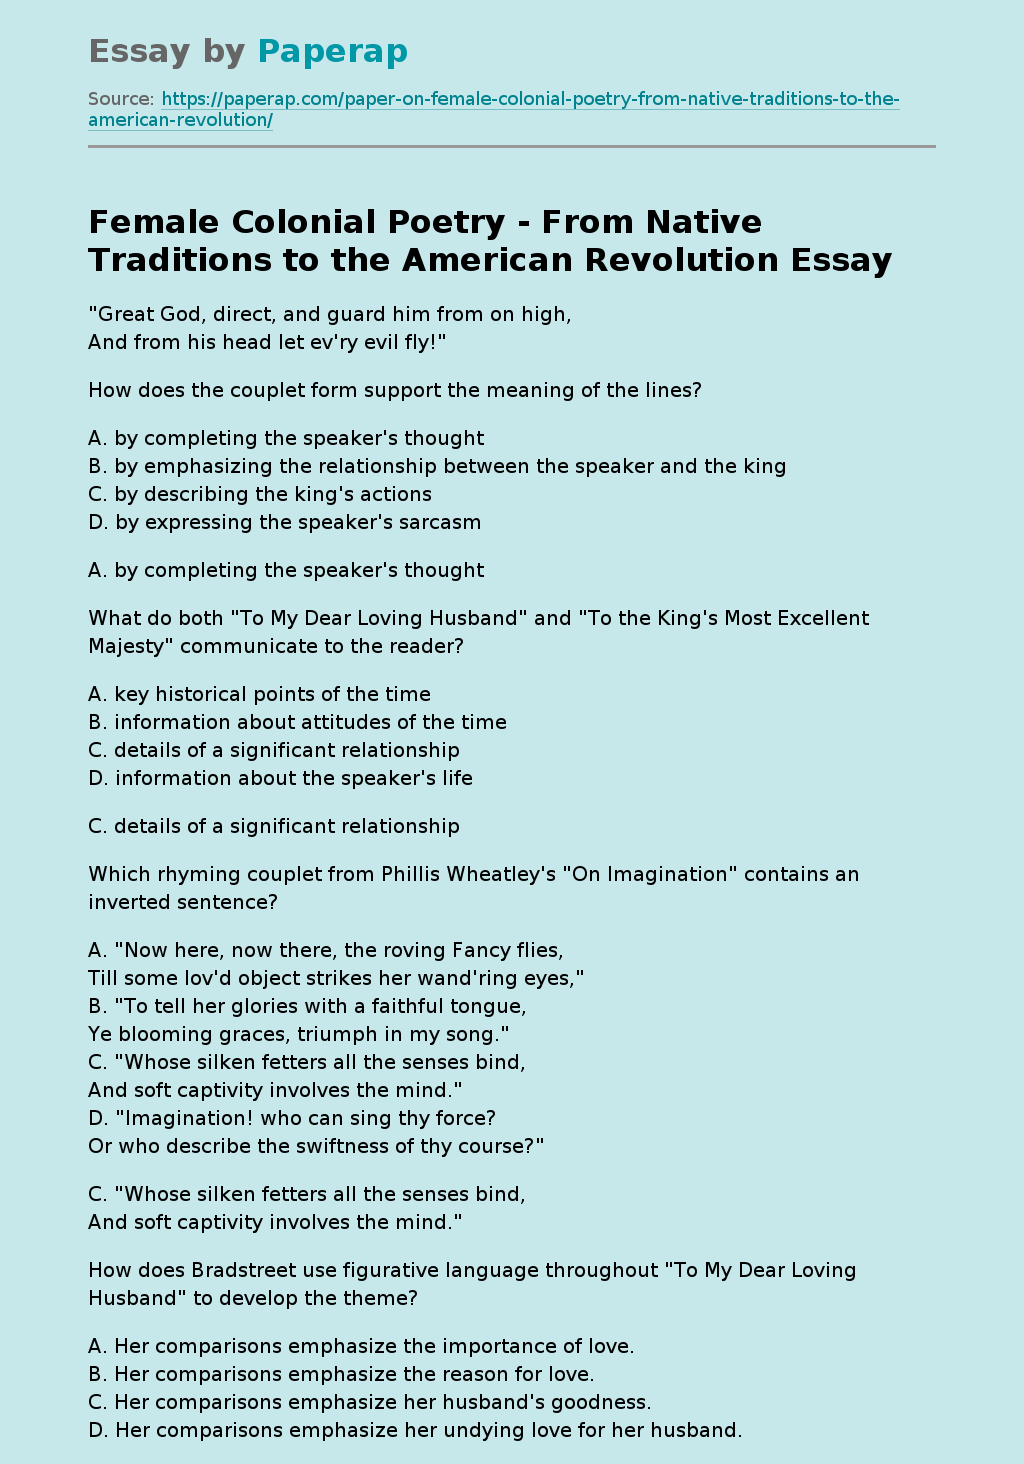 Female Colonial Poetry - From Native Traditions to the American Revolution